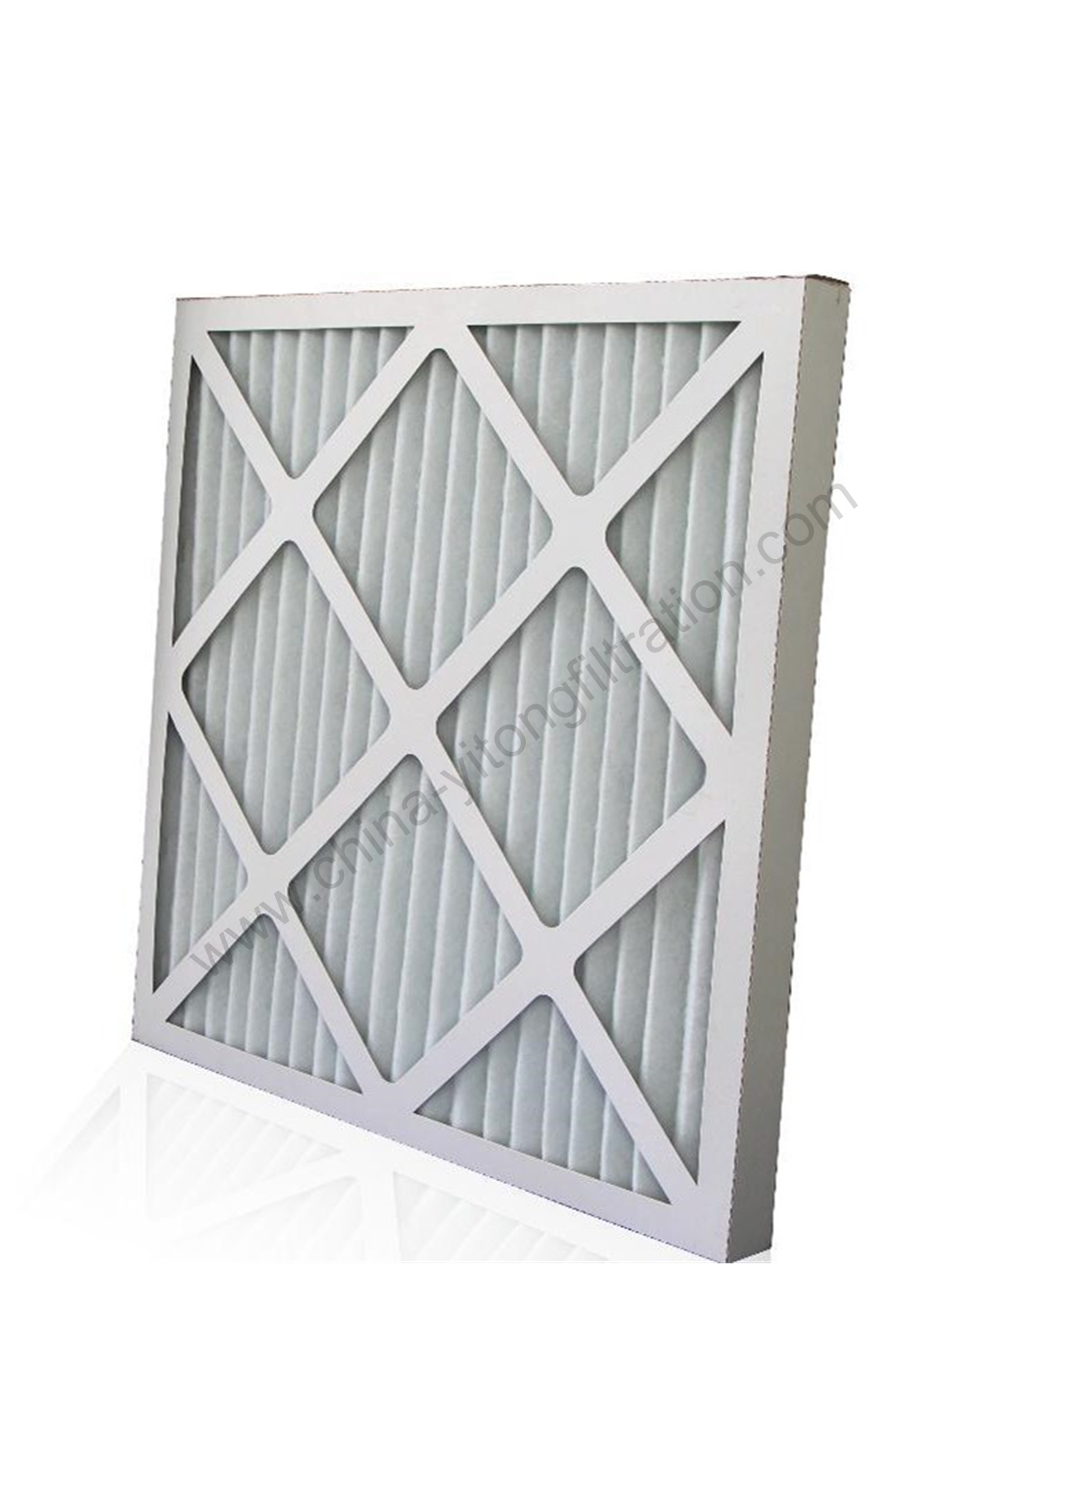 YTBS series—Plate Type Air Filter